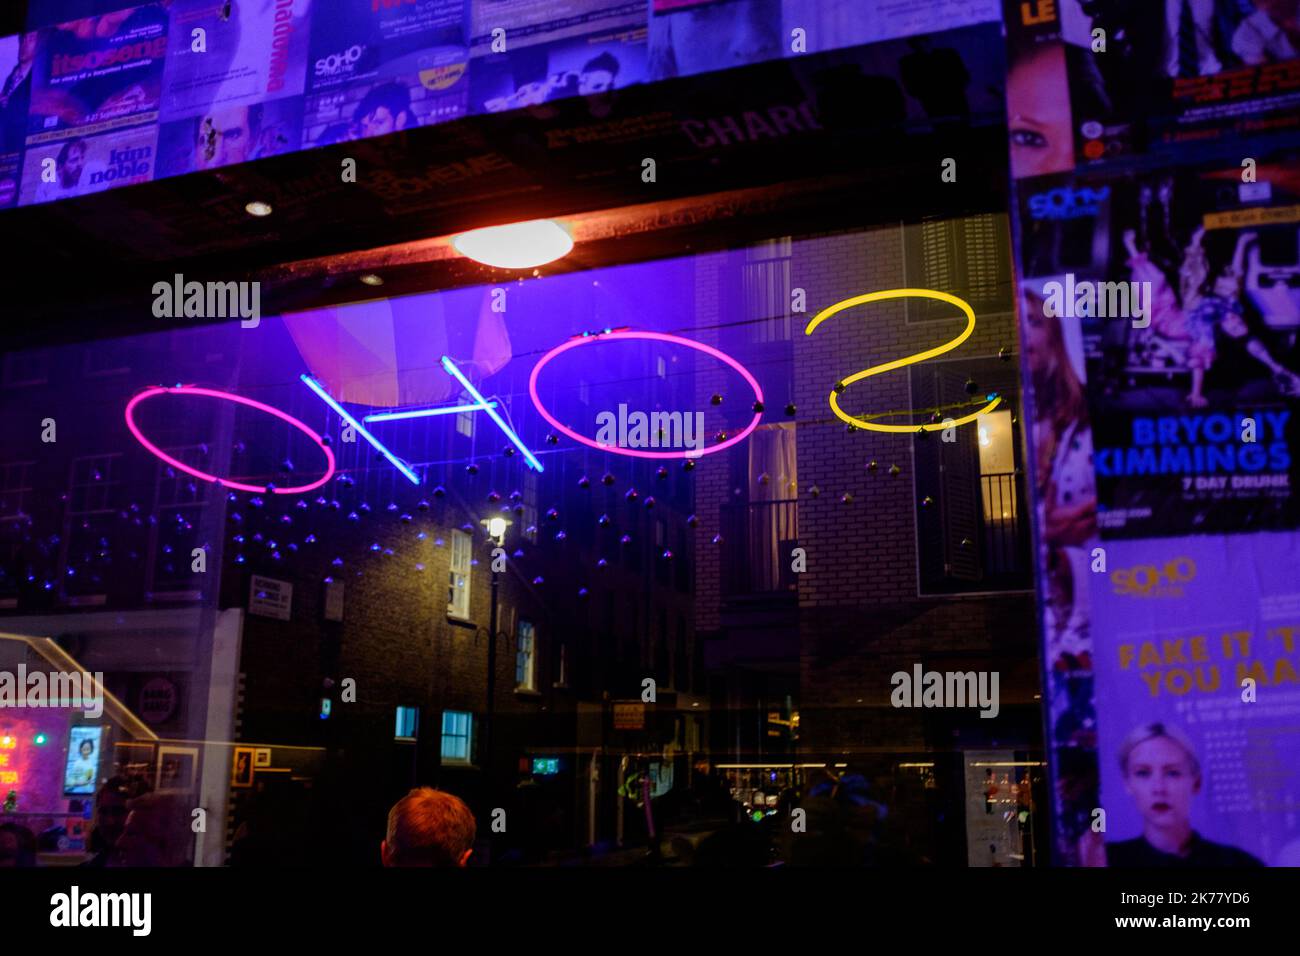 Atmospheric and illuminating neon Soho lettered sign at night time in London's Soho entertainment district, 2022 Stock Photo